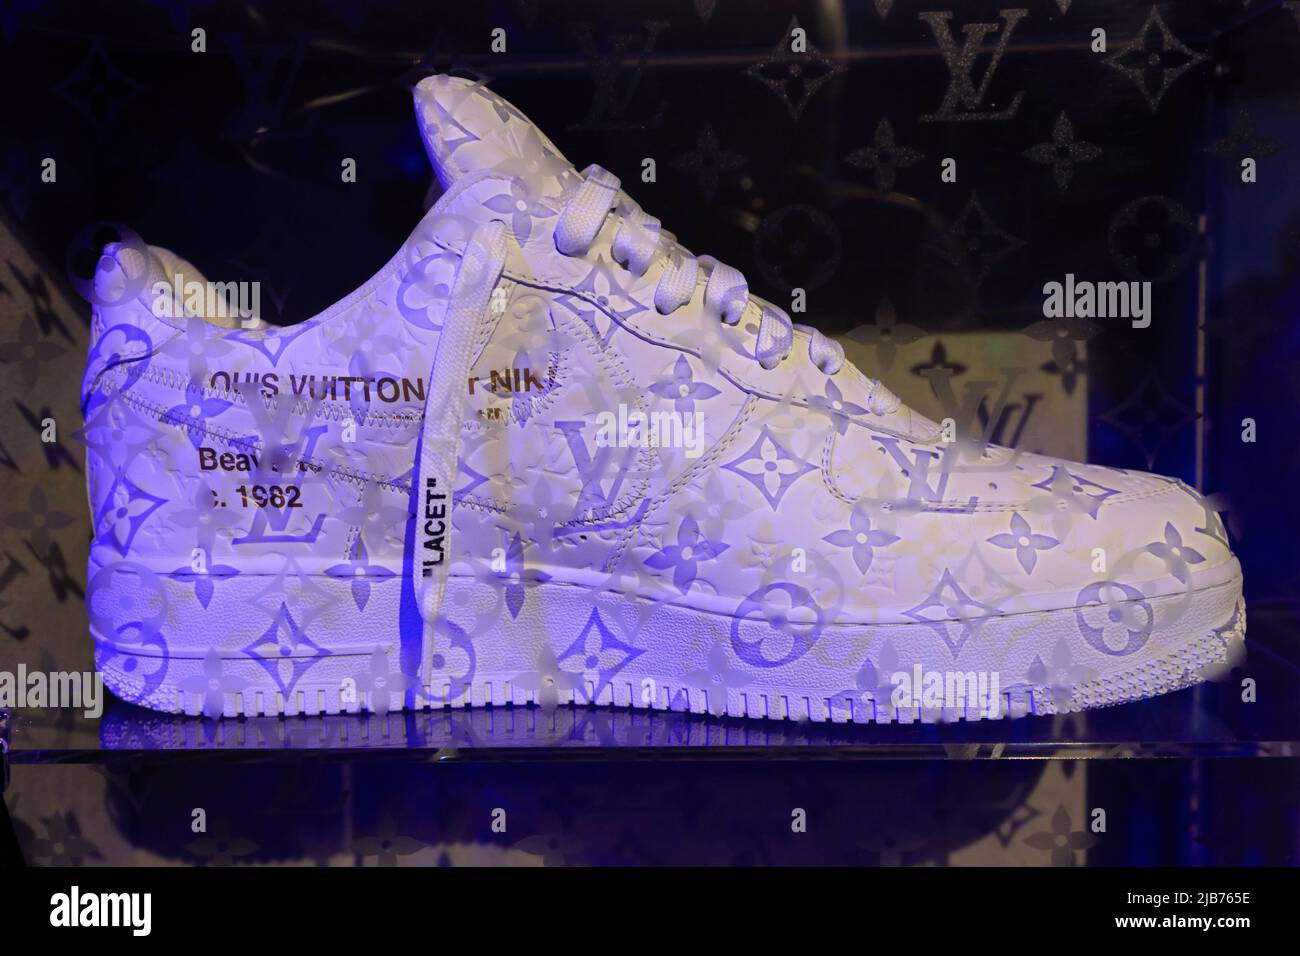 Art Installations Pop Up All over New York City to Celebrate Louis Vuitton  and Nike 'Air Force 1' Designed by Virgil Abloh - Galerie